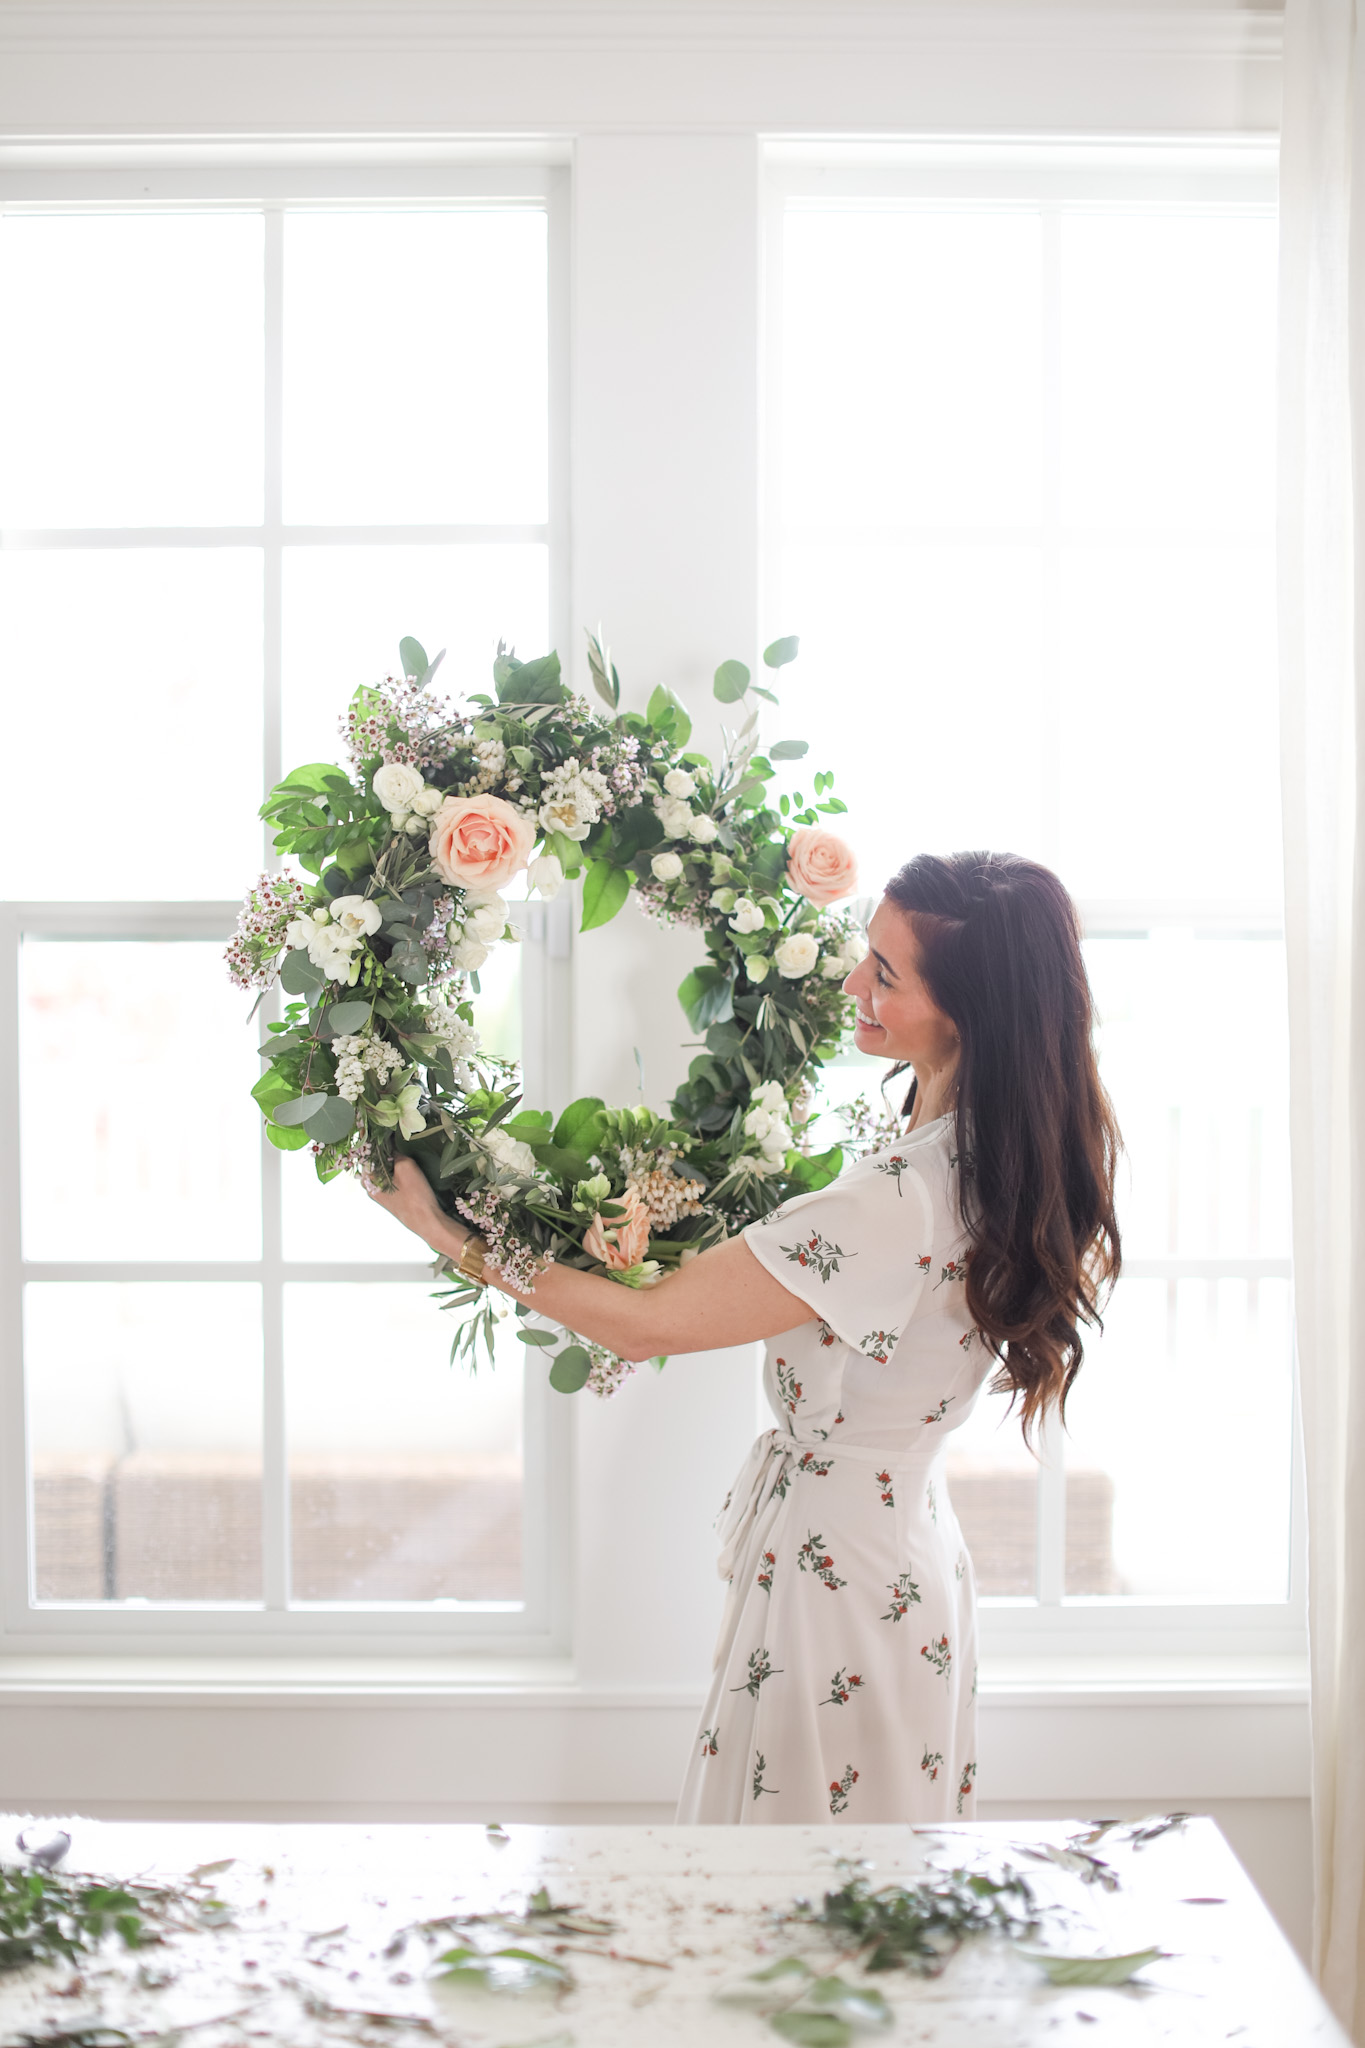 Tori Wesszer Fraiche Living holding completed floral wreath in a white dress